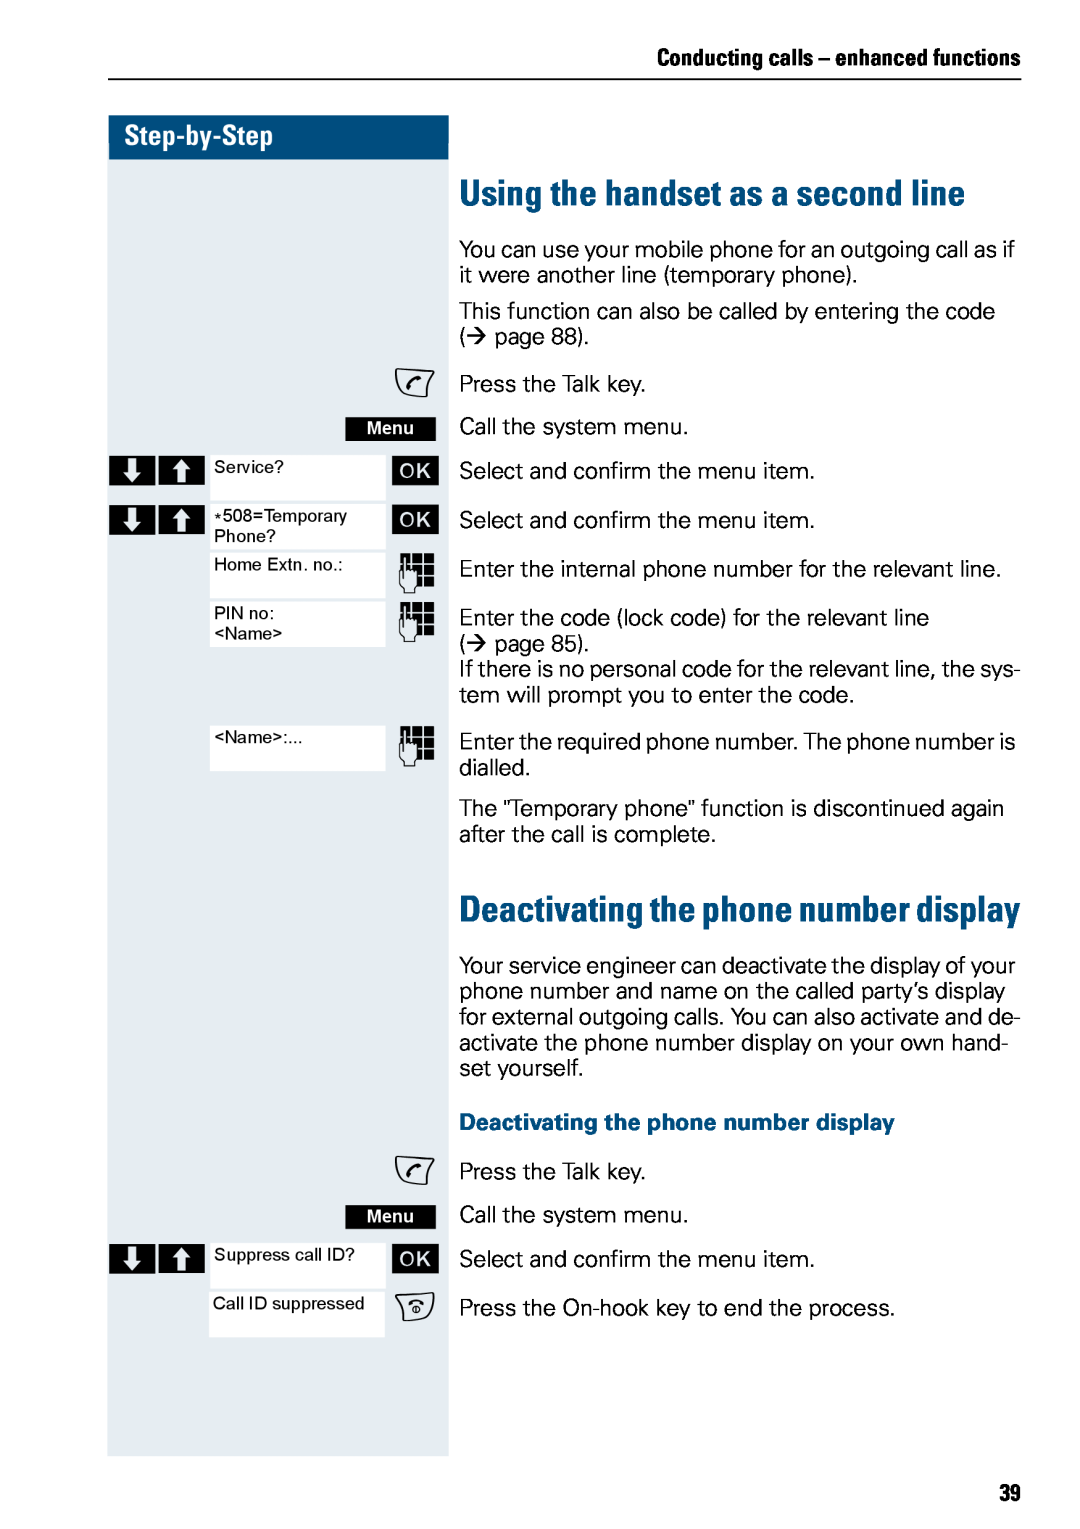 Siemens 500 manual Using the handset as a second line, Deactivating the phone number display, Step-by-Step 